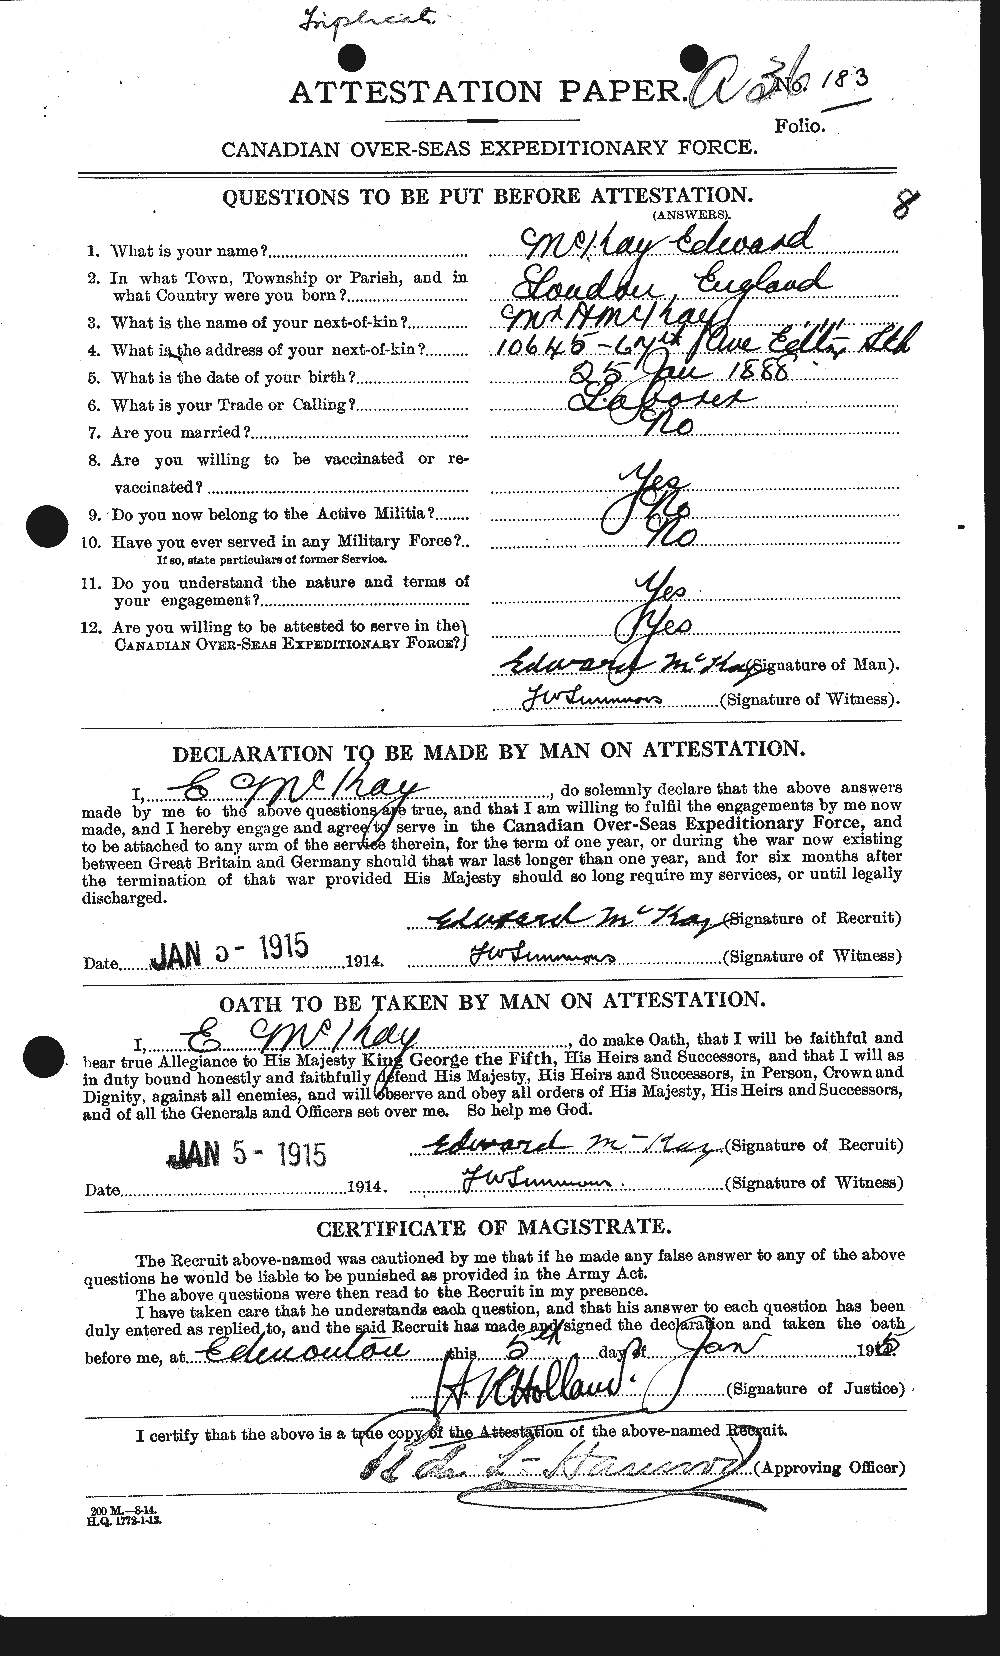 Personnel Records of the First World War - CEF 534568a